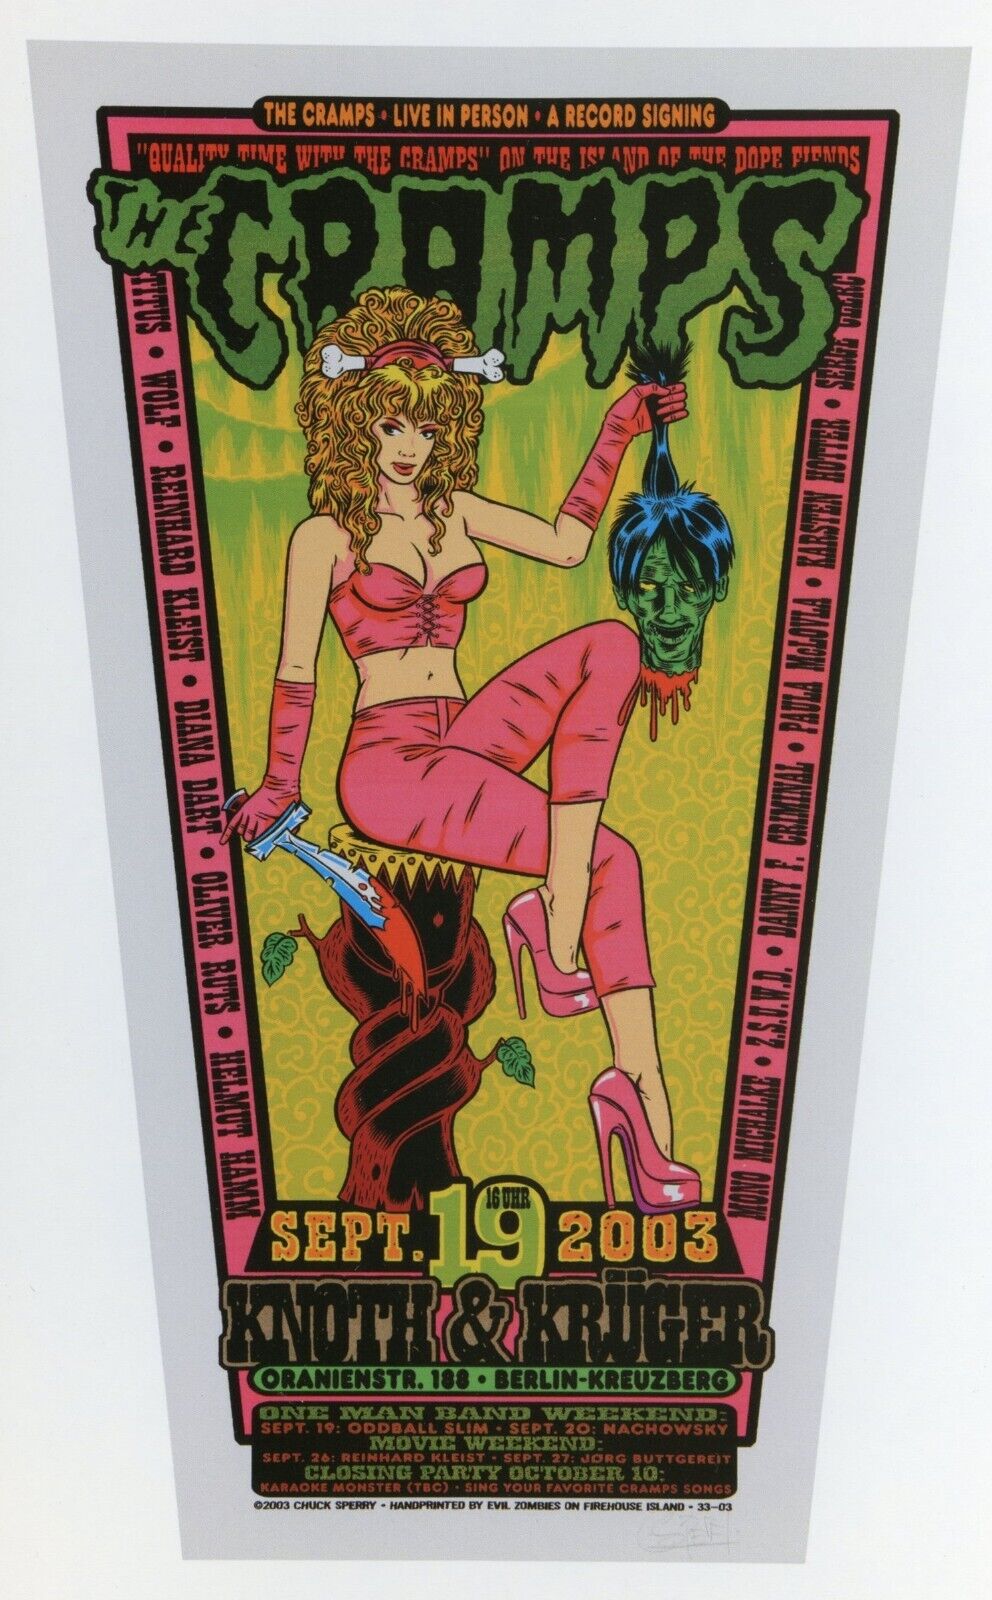 Chuck Sperry 2003 The Cramps Live In Person Mini Poster Print Berlin Germany